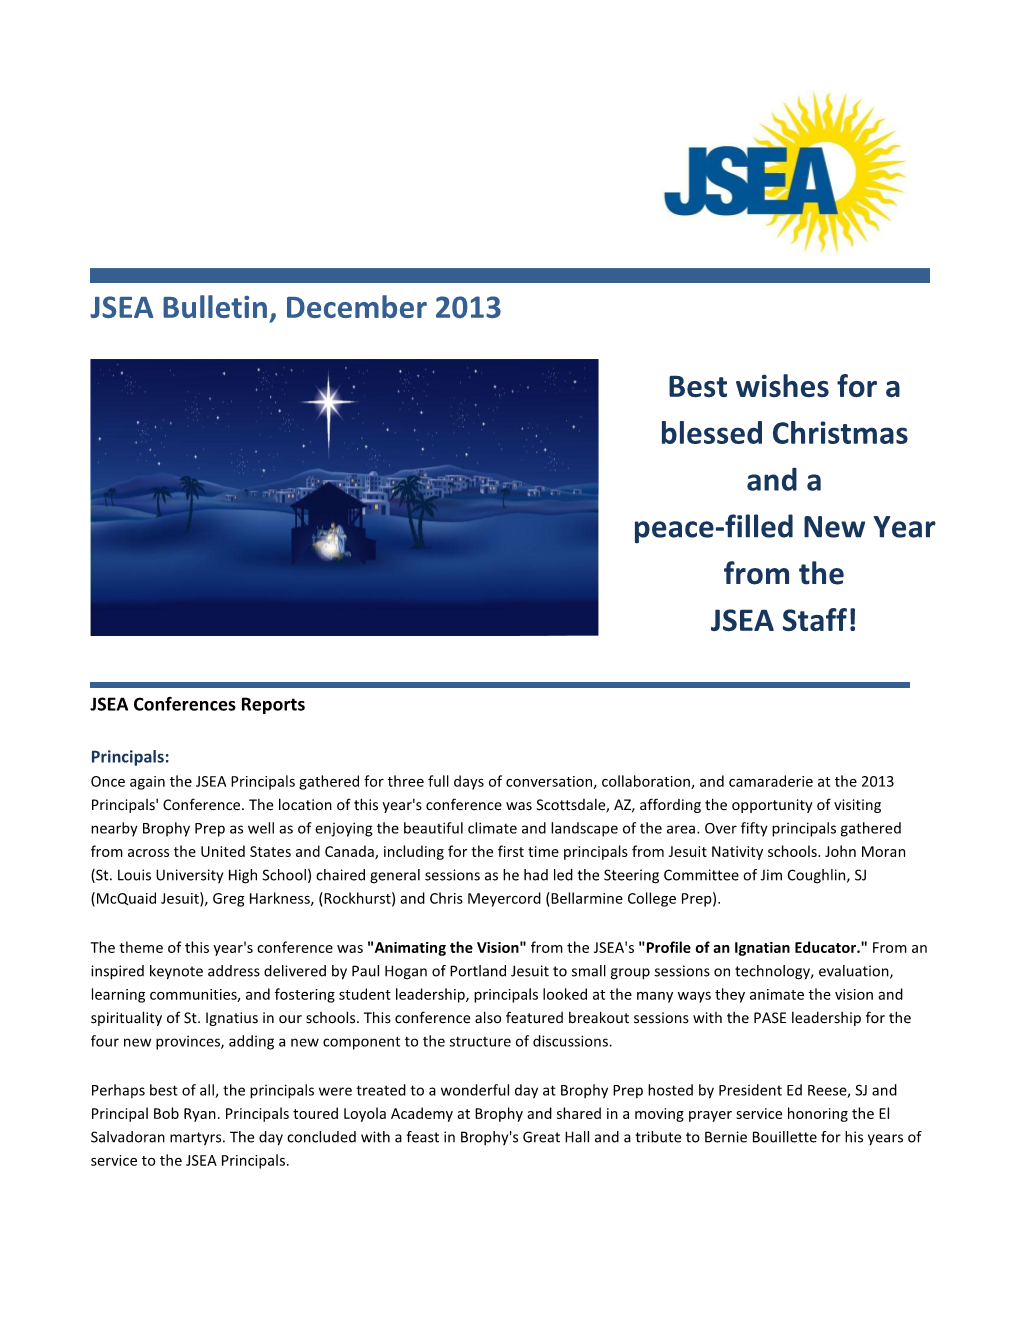 JSEA Bulletin, December 2013 Best Wishes for a Blessed Christmas and a Peace-Filled New Year from the JSEA Staff!